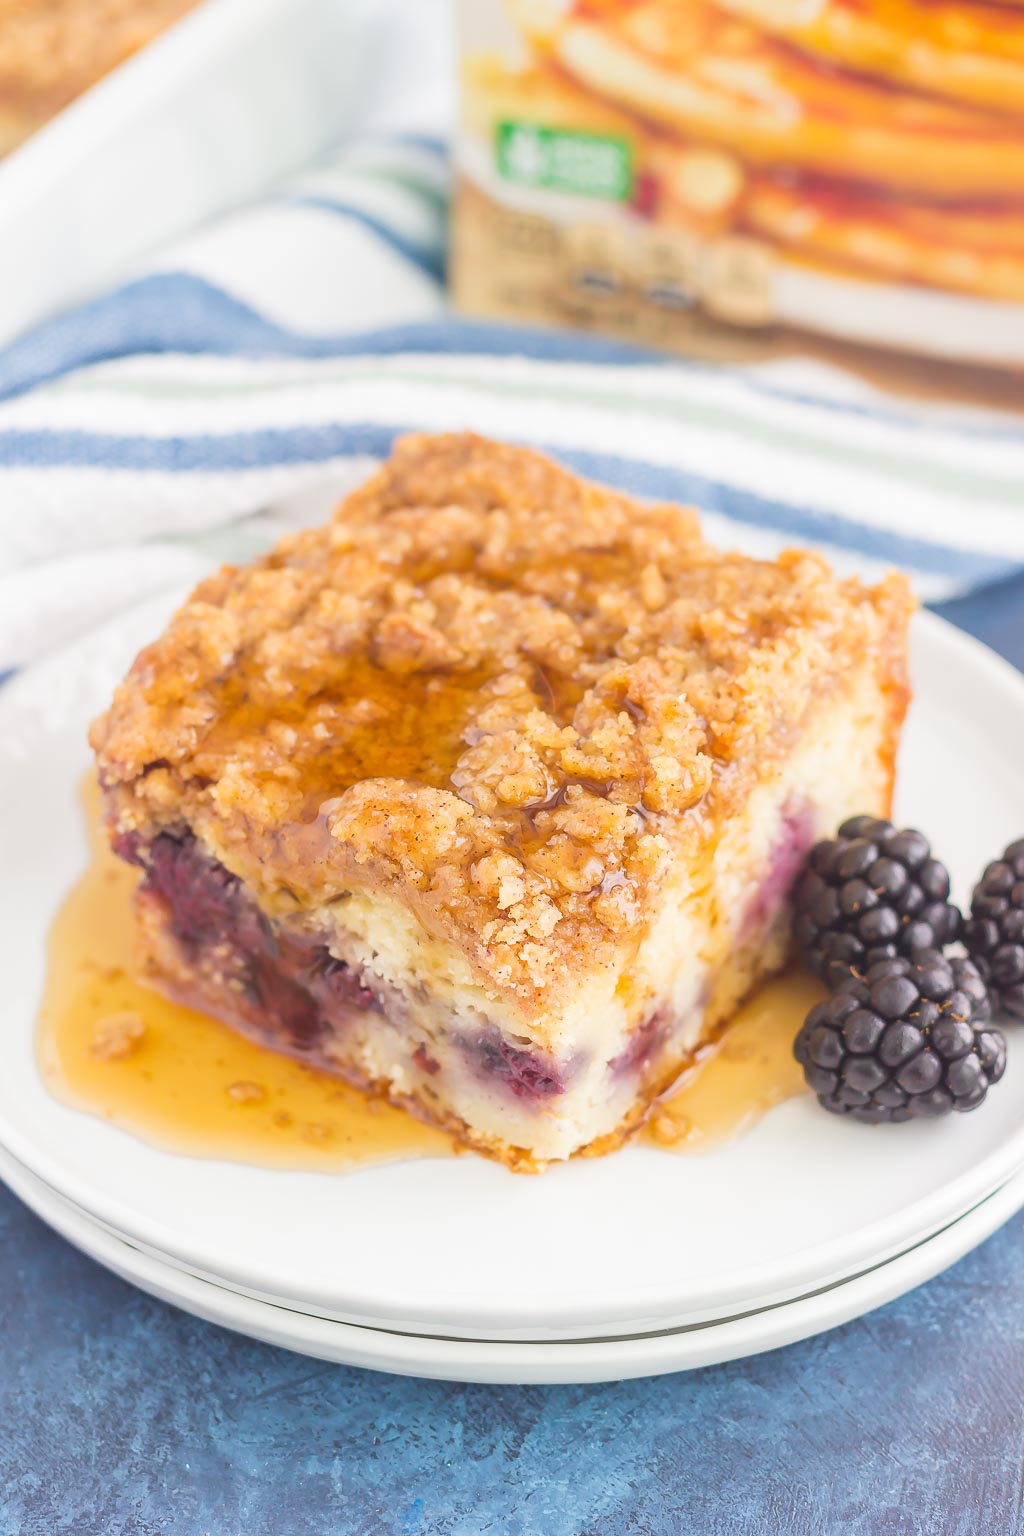 This Blackberry Streusel Pancake Casserole is an easy dish that the whole family will enjoy. Fluffy, buttermilk pancake batter is studded with fresh blackberries and then topped with cinnamon streusel. Baked until golden and bursting with flavor, this comfort dish is the ultimate breakfast!